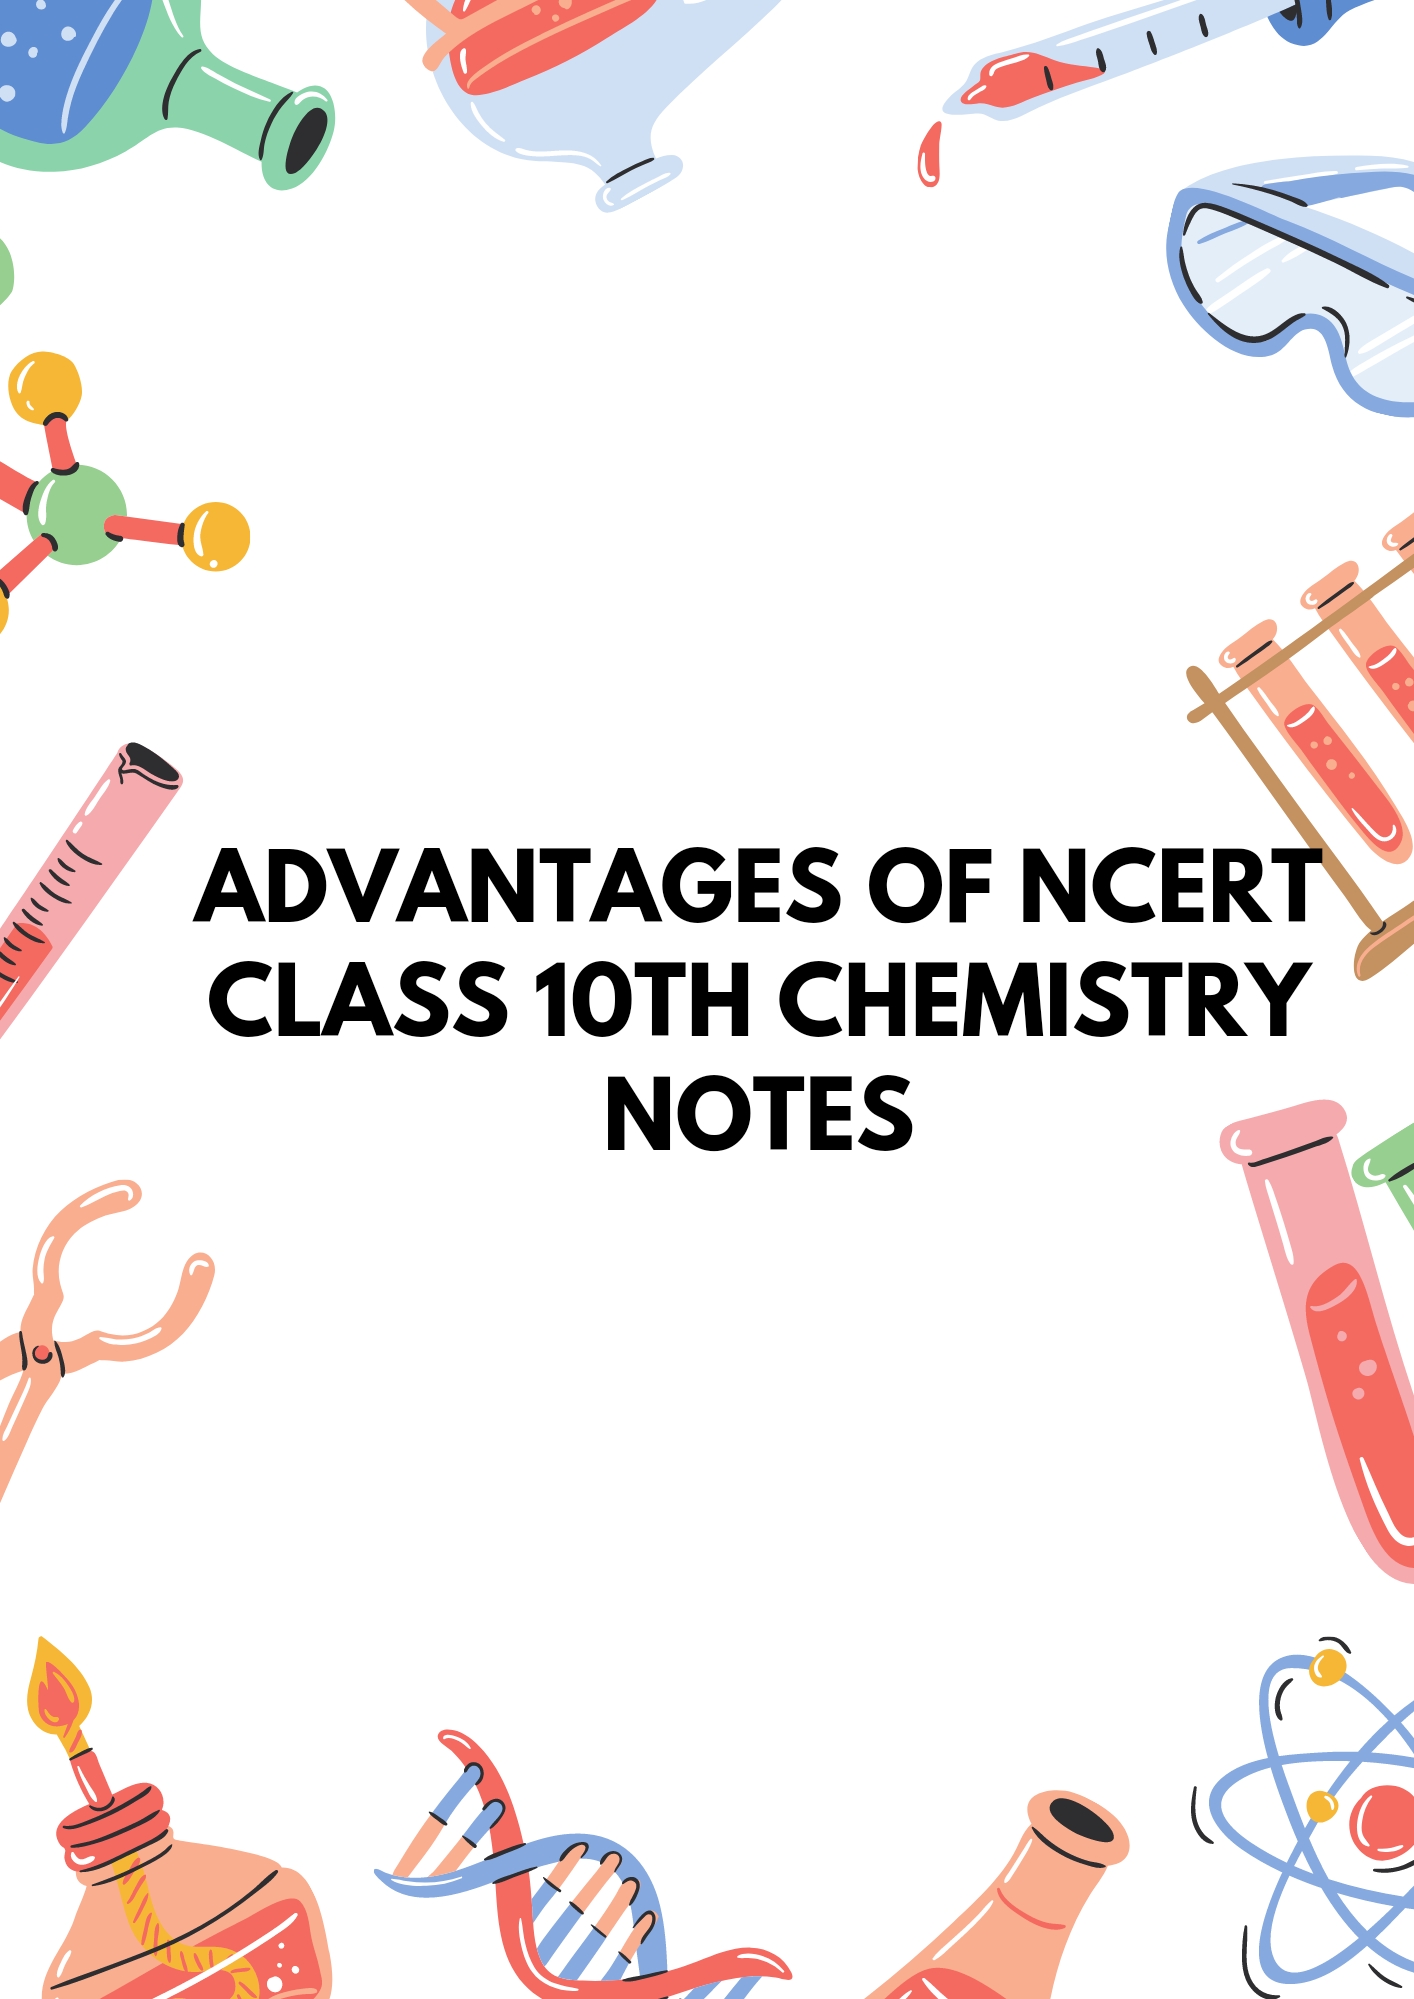 Advantages of Ncert Class 10th Chemistry Notes